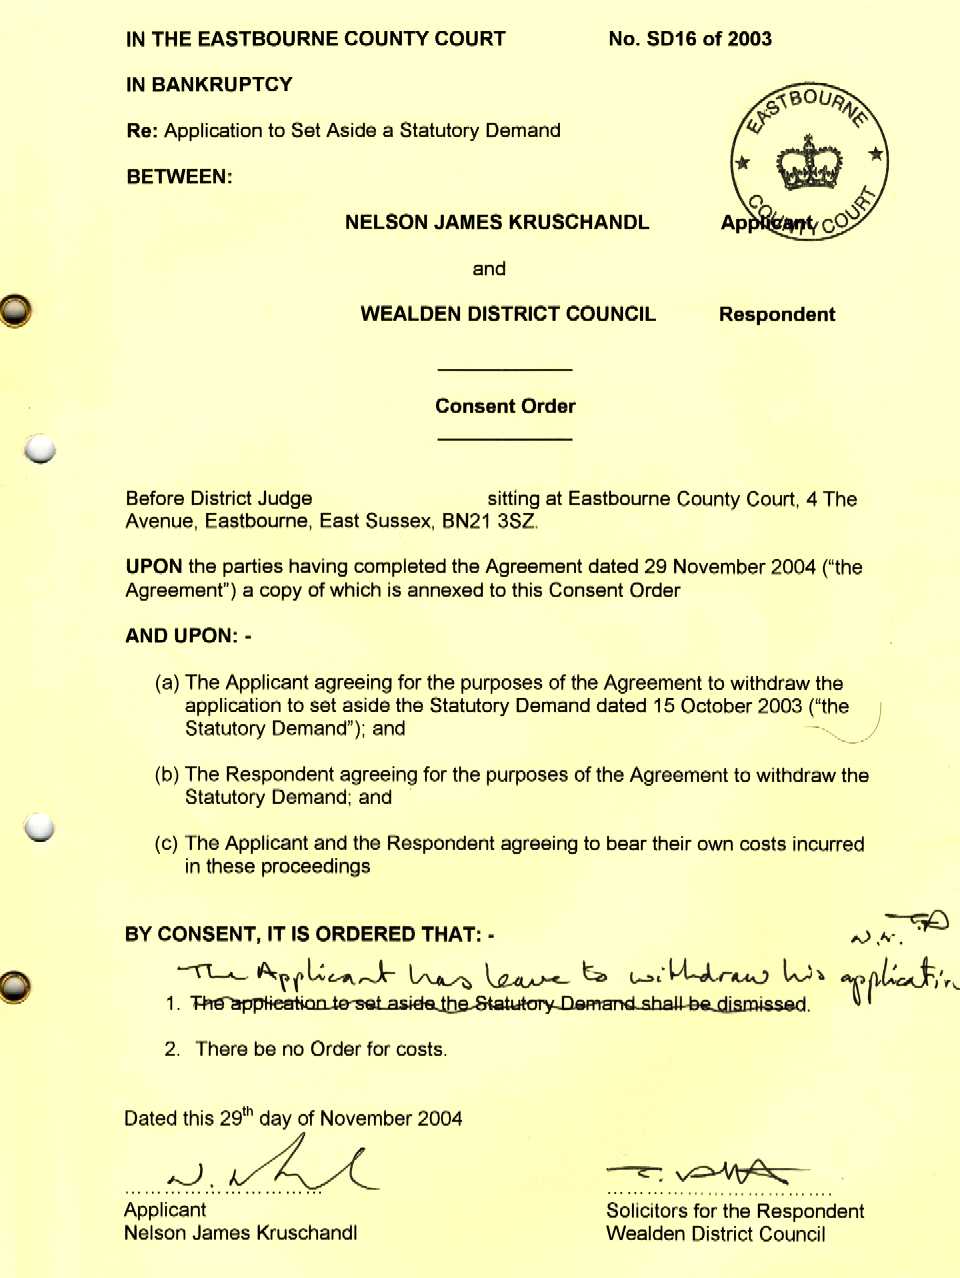 Consent Order, County Court stay and planning agreement 2004